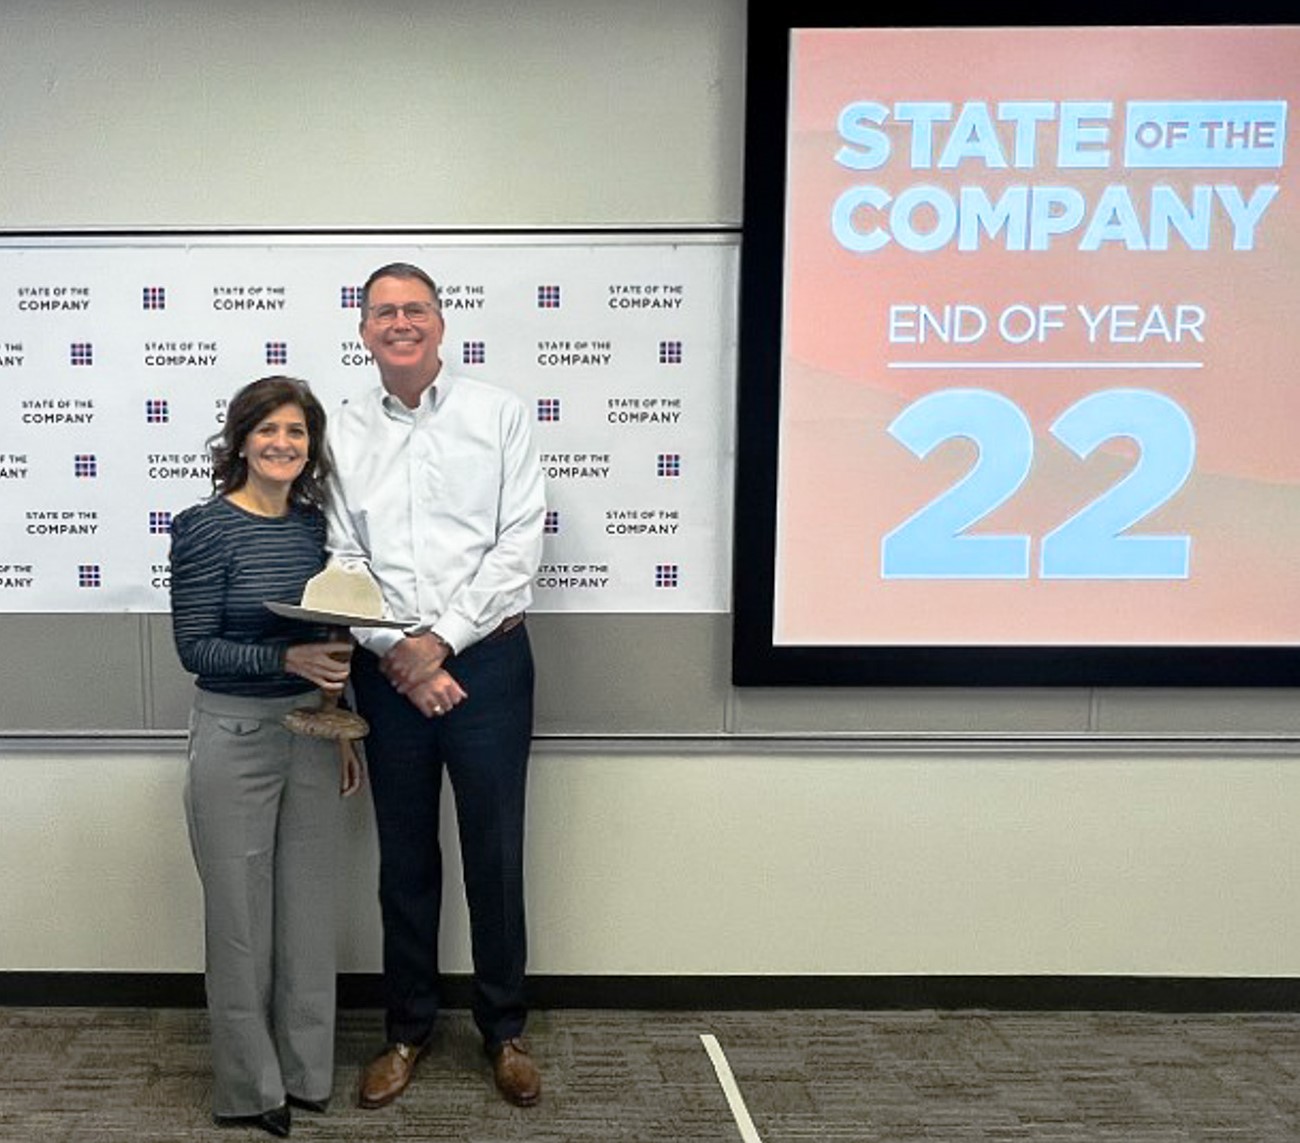 Halff's President/CEO Mark Edwards (right) presented the Stetson Award to Susie Nevitt at the end-of-year State of the Company Dec. 7, 2022.